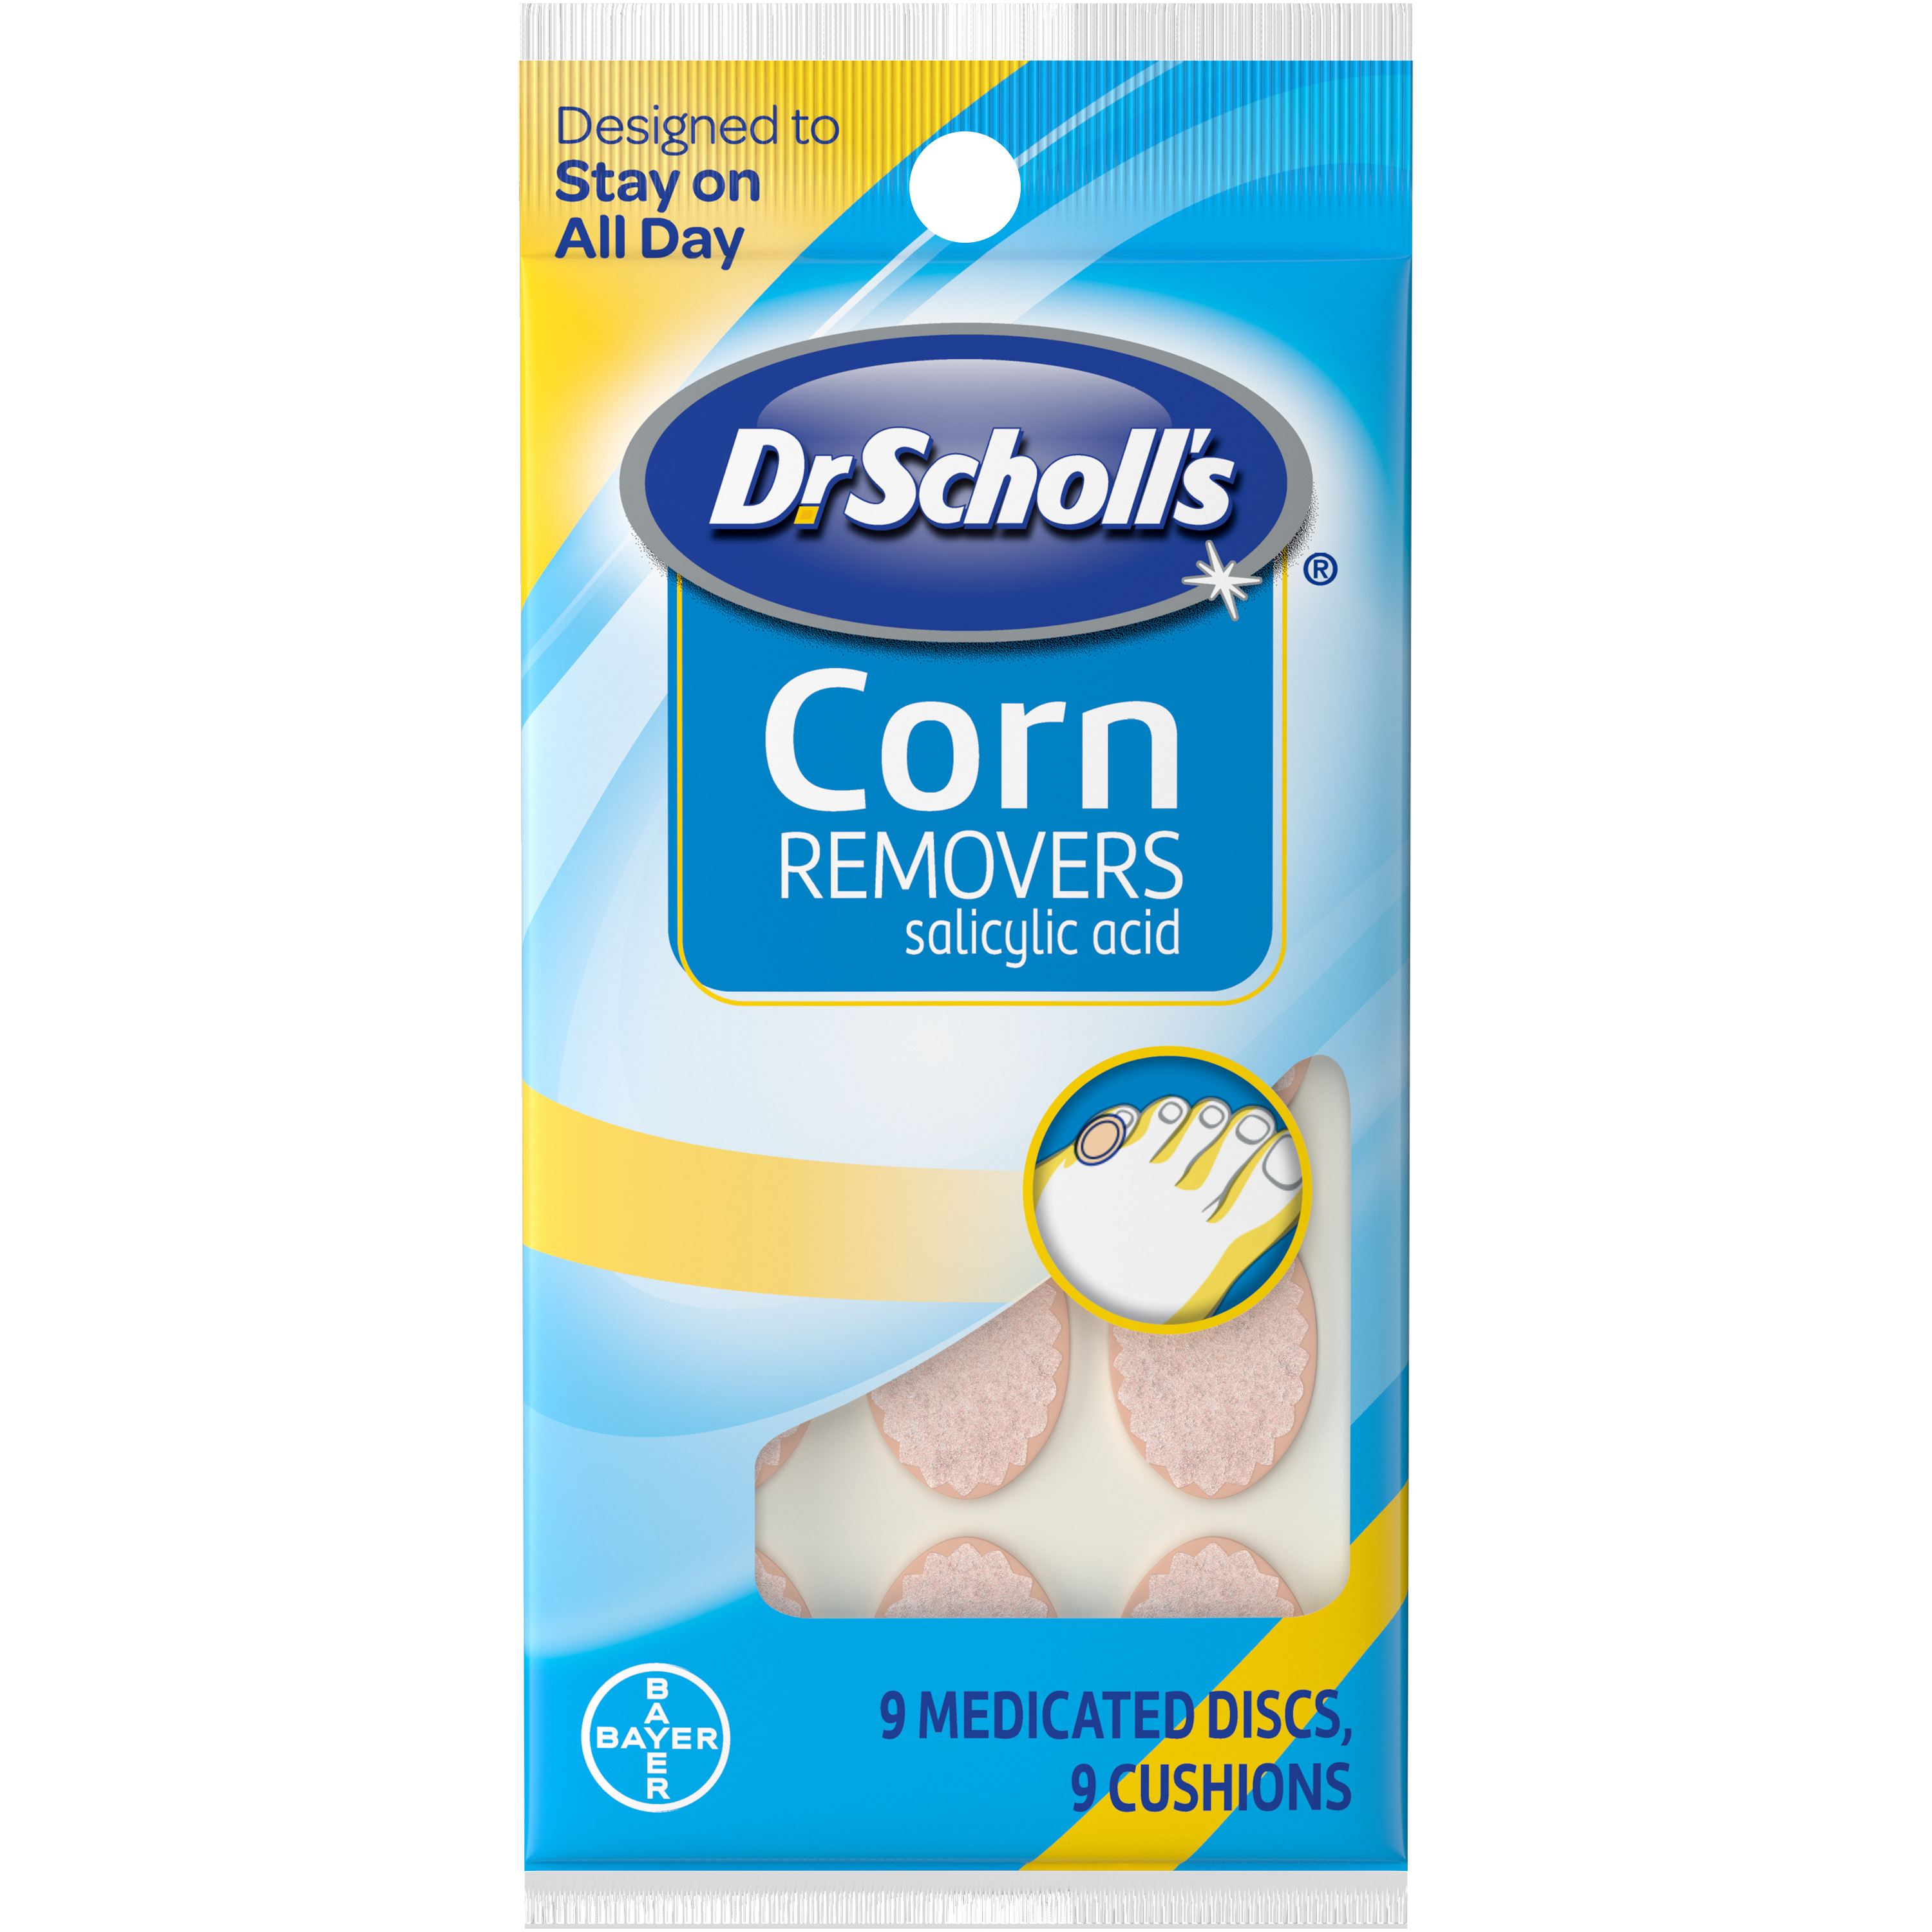 Dr. Scholl's Corn Removers, 9 Cushions, 9 Medicated Discs - image 1 of 8